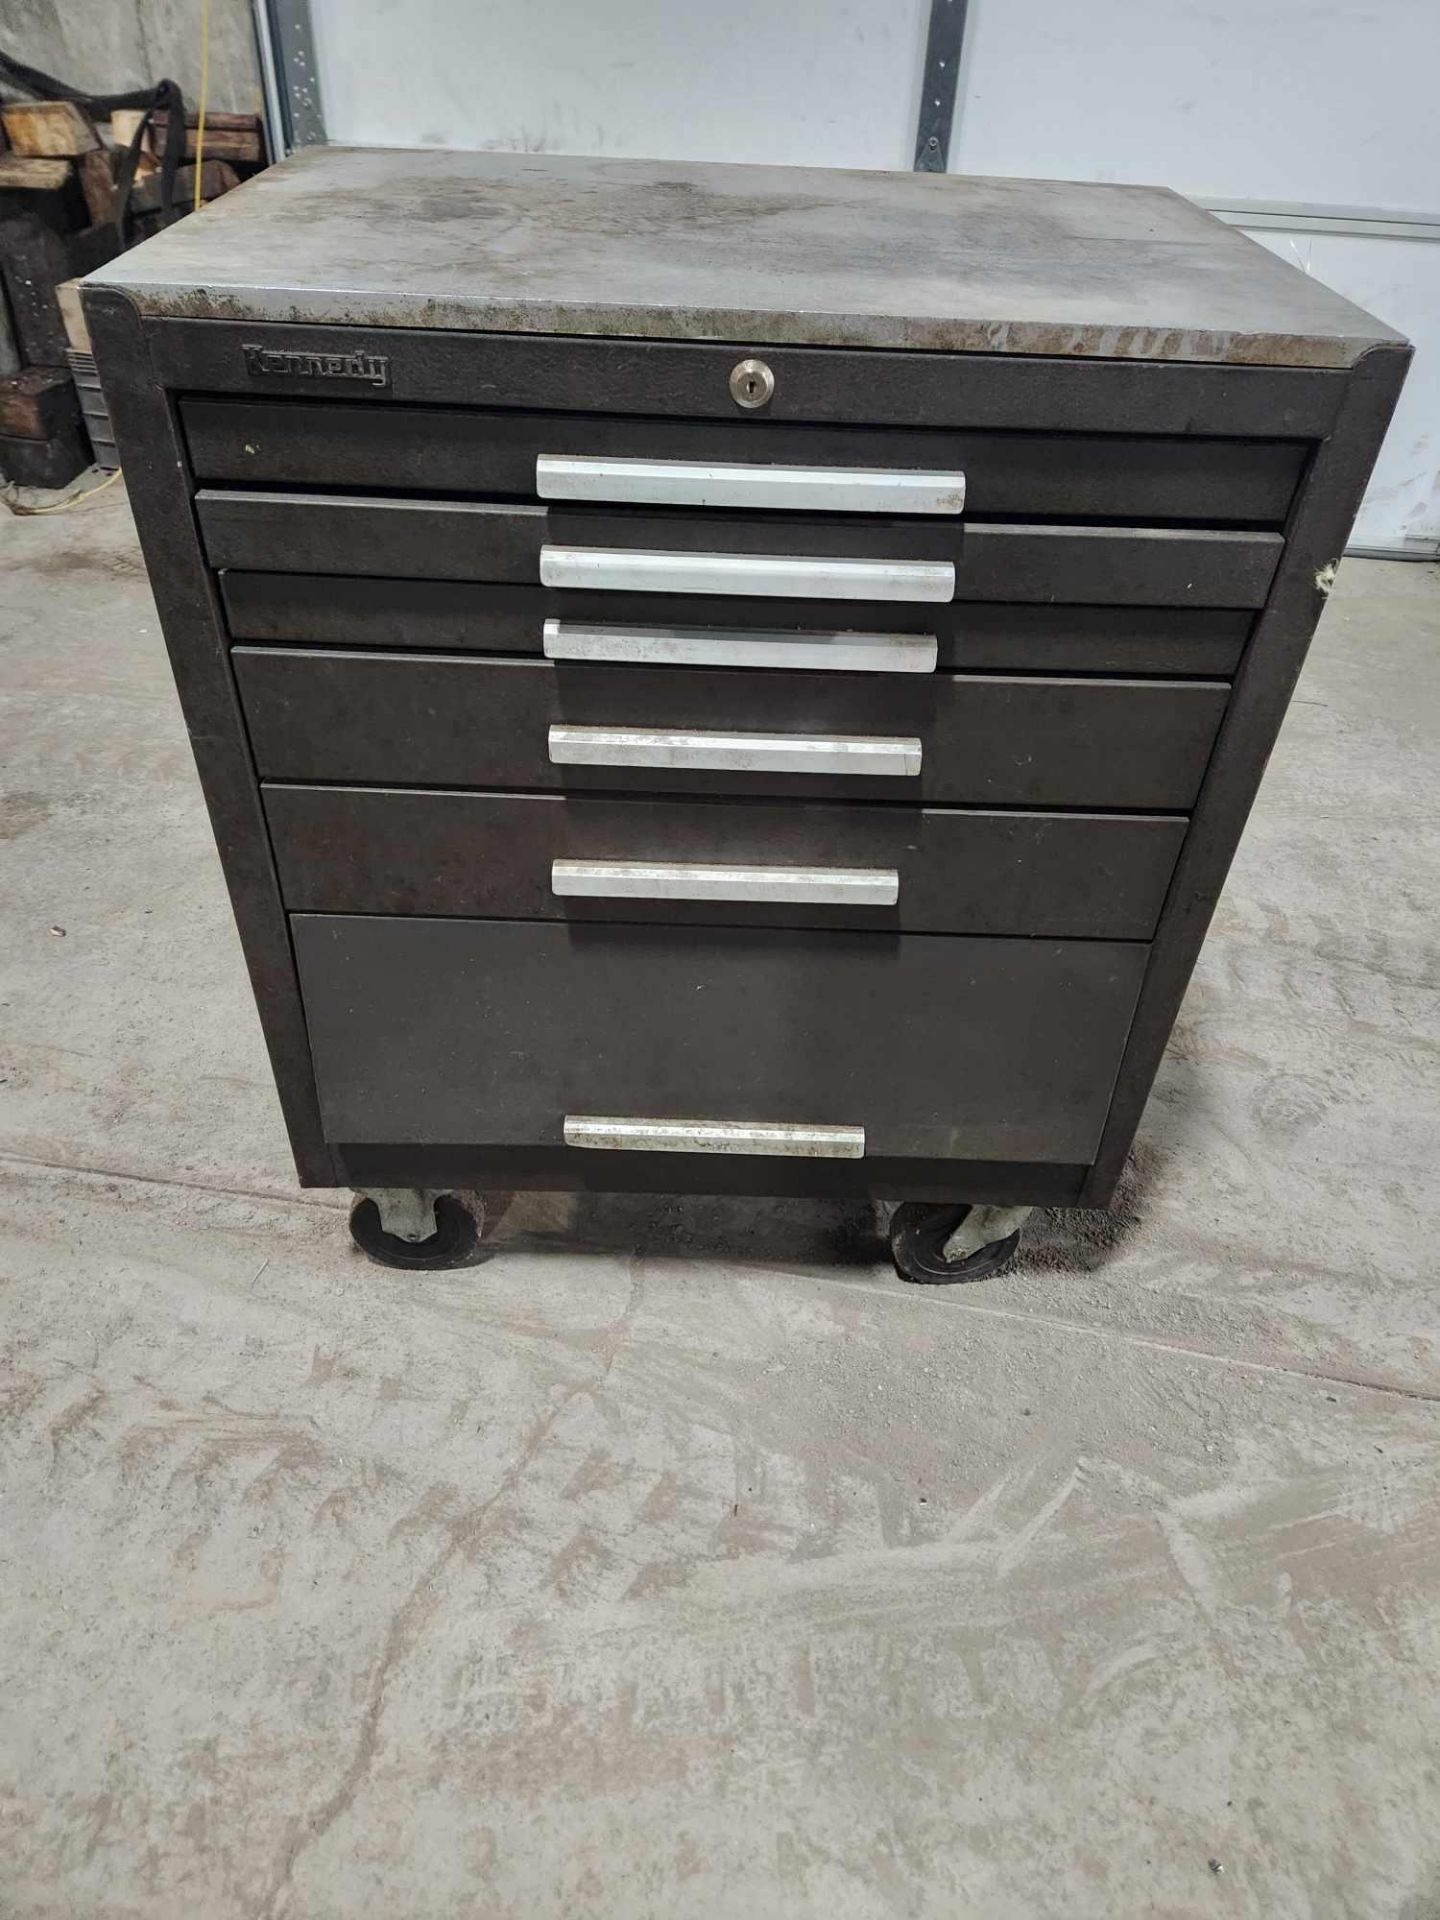 KENNEDY TOOL CHEST